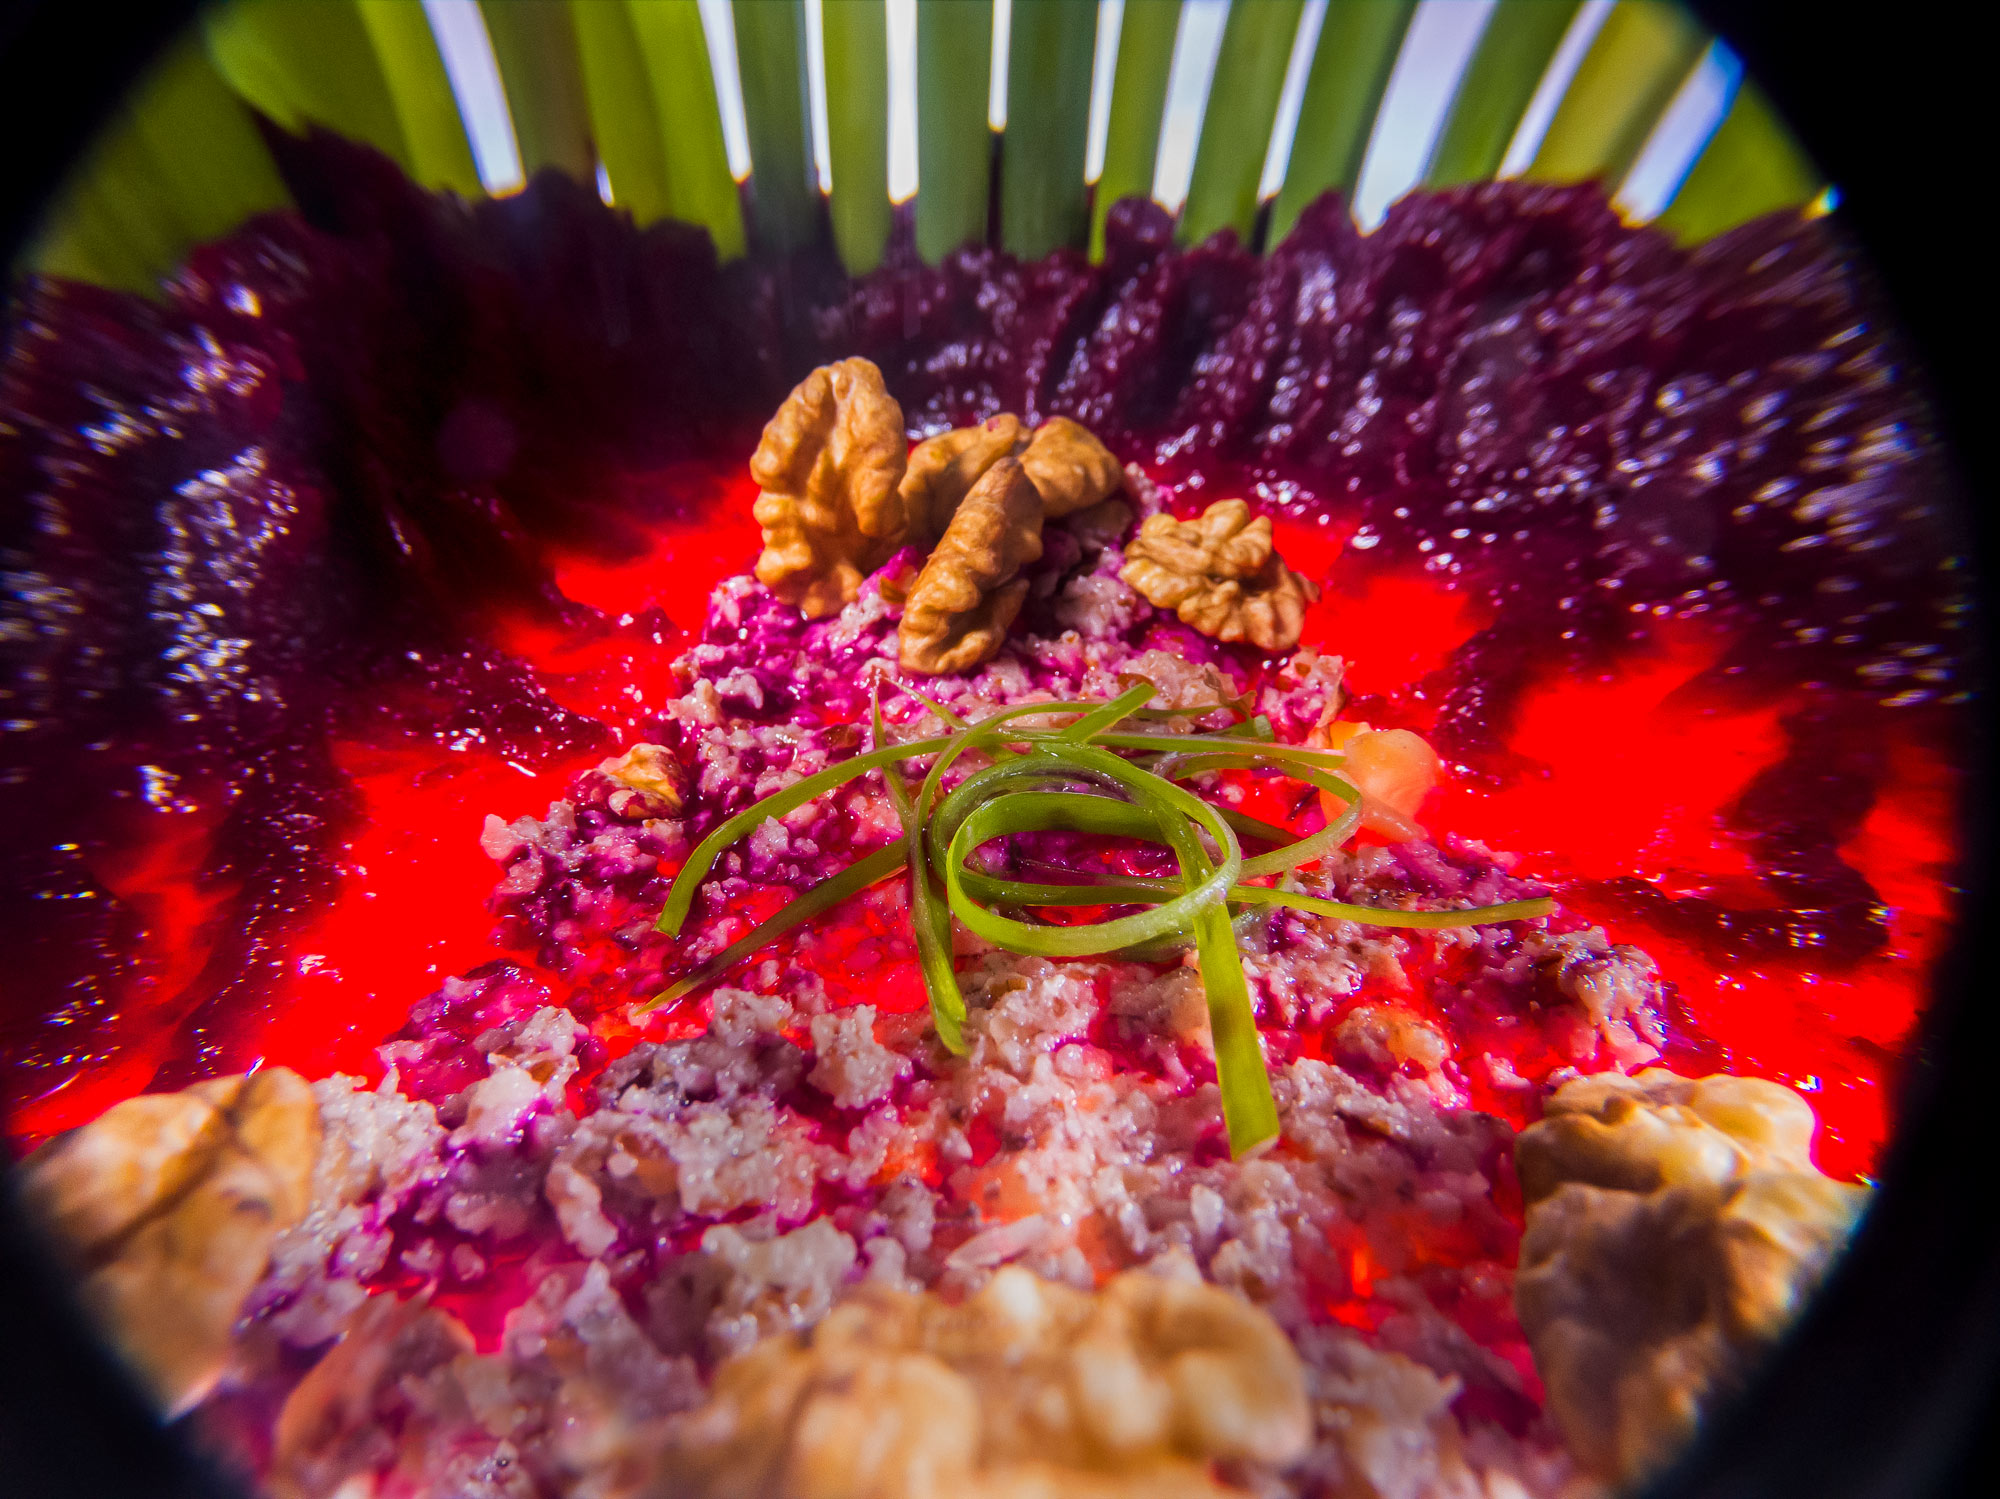 Inside food photo series, depicting a close up view of a beetroot salad with walnuts.